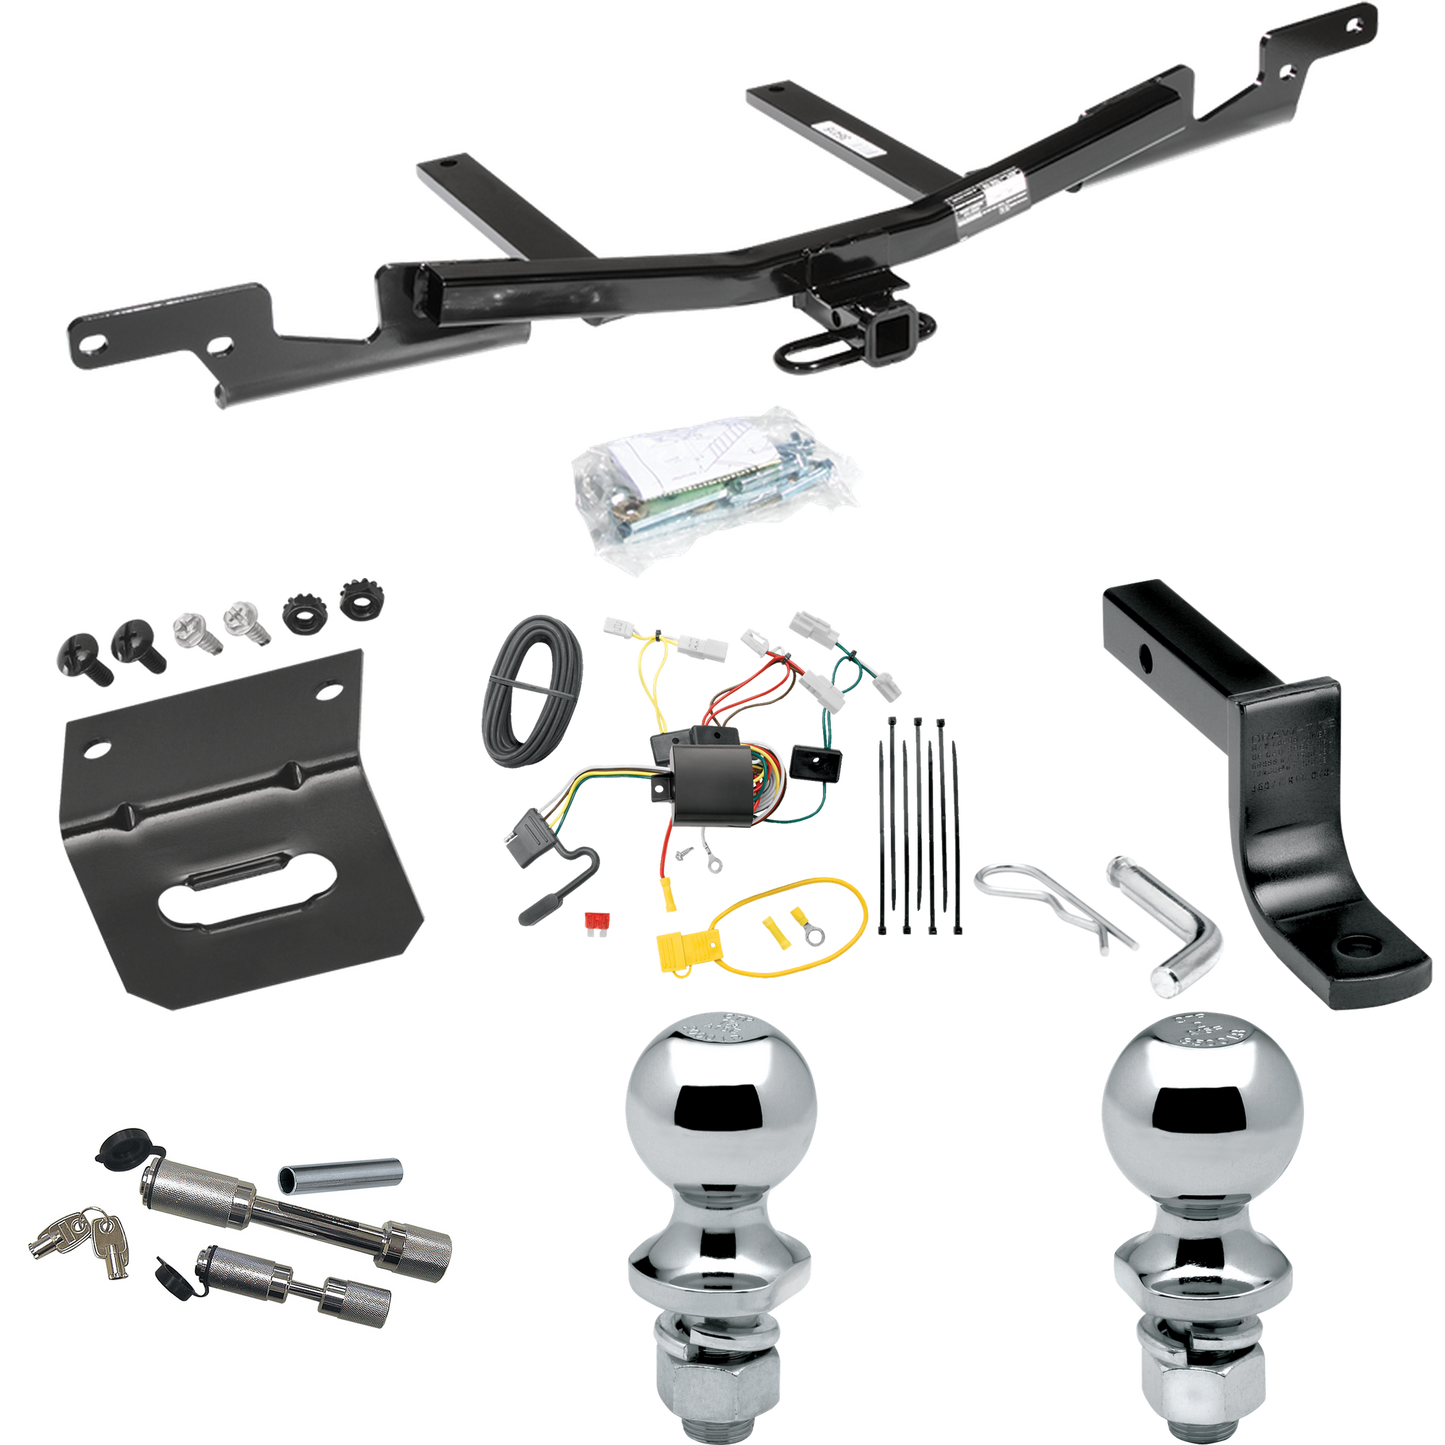 Fits 2007-2009 Toyota Camry Trailer Hitch Tow PKG w/ 4-Flat Wiring Harness + Draw-Bar + 1-7/8" + 2" Ball + Wiring Bracket + Dual Hitch & Coupler Locks (For Sedan, Except Hybrid Models) By Reese Towpower